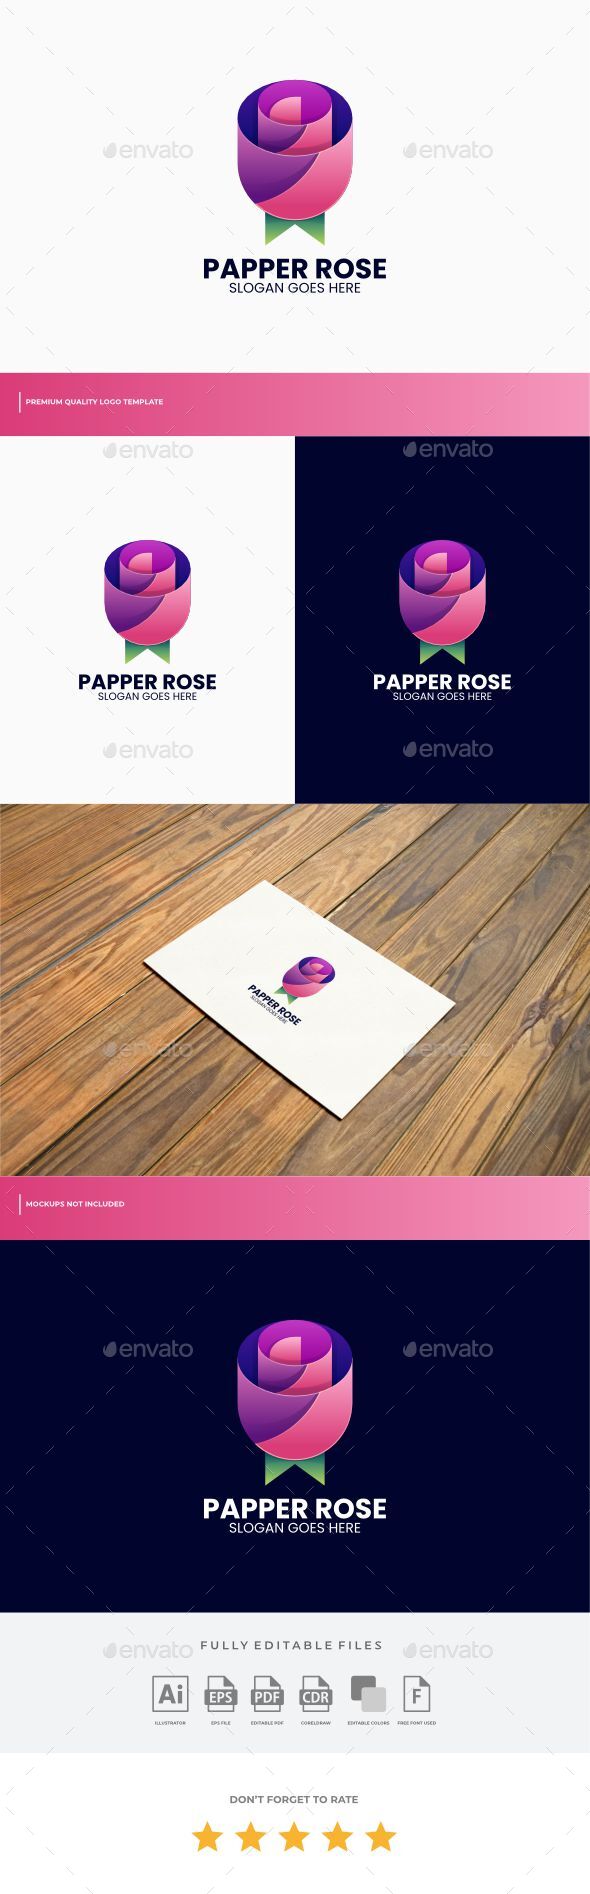 [DOWNLOAD]Paper Rose Colorful Logo Template